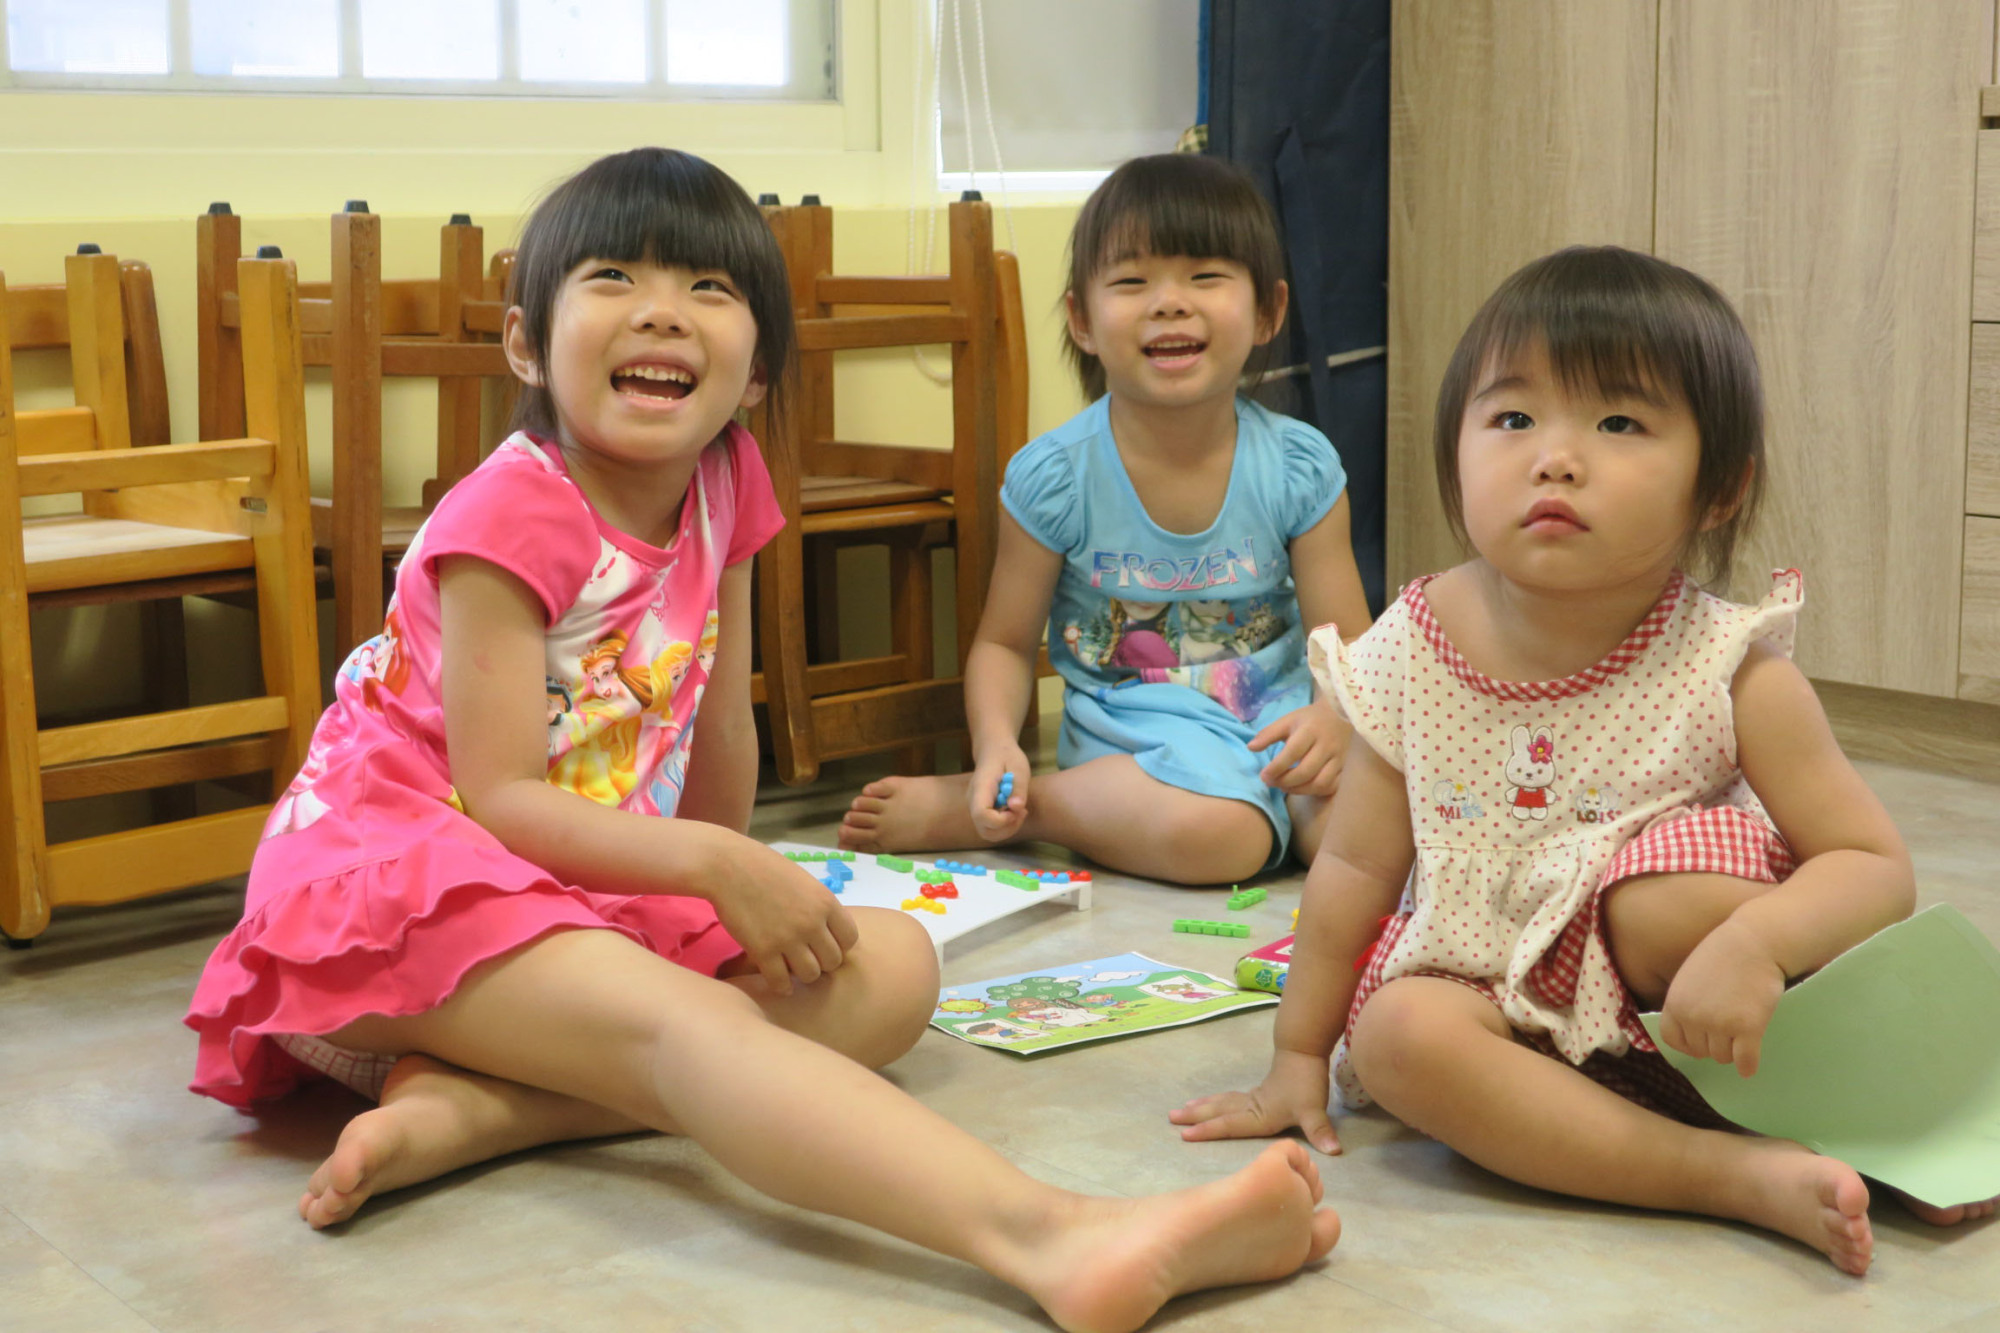 Children play at a preschool in Taipei in June. | KYODO